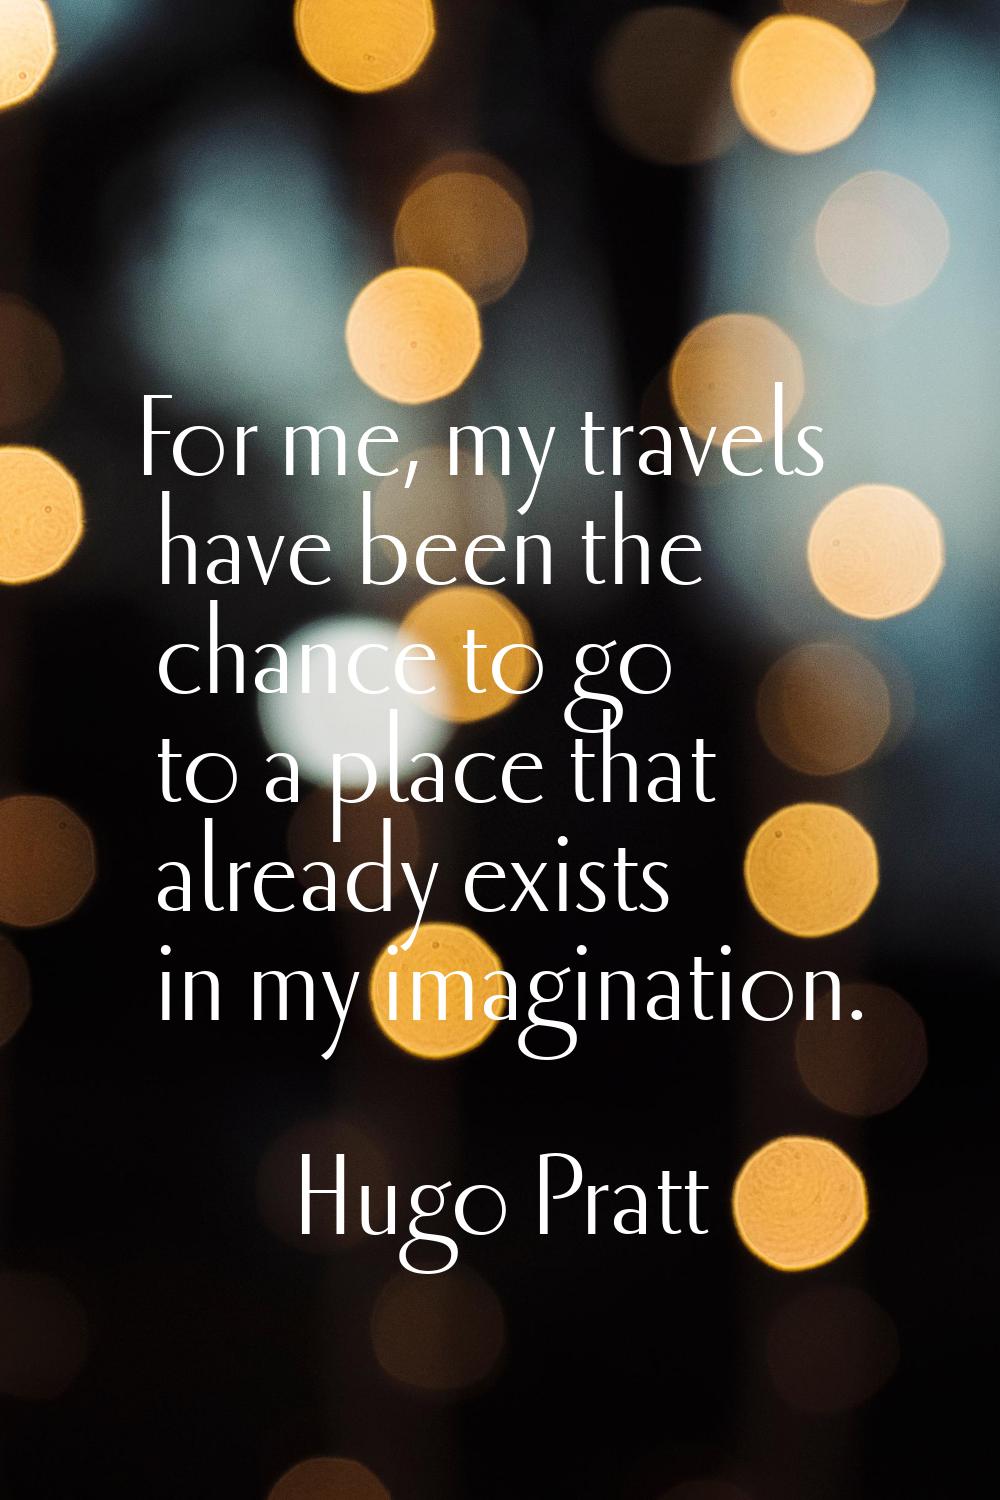 For me, my travels have been the chance to go to a place that already exists in my imagination.